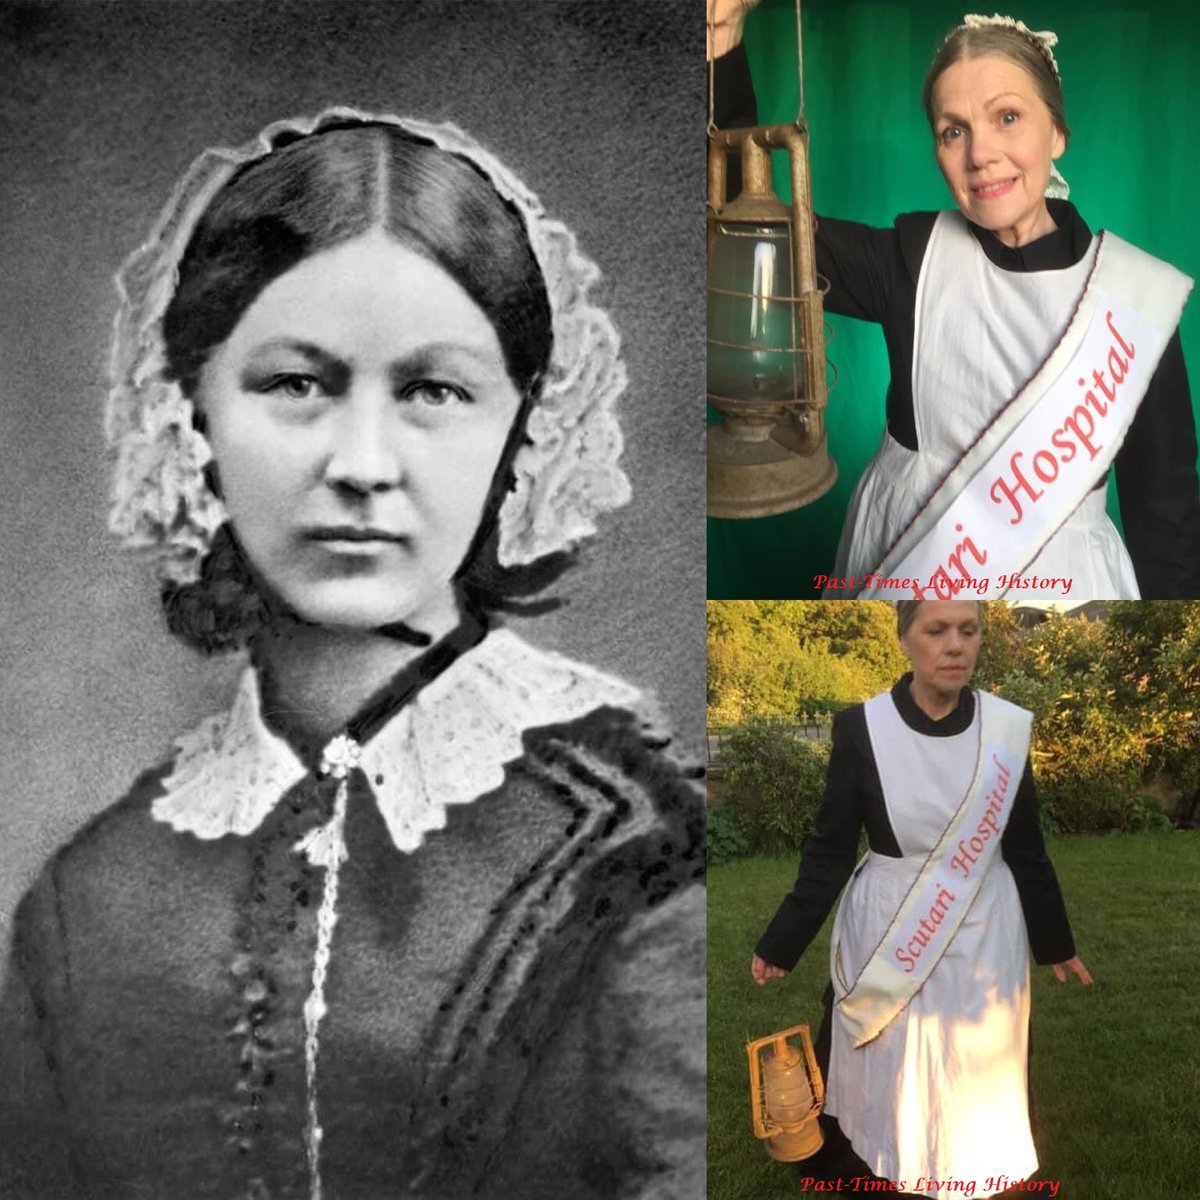 #OTD 12 May 1820 the amazing #FlorenceNightingale was born
Today is also celebrated as #InternationalNursesDay, fittingly as she & other strong forward thinking women such as #MarySeacole are who we have to thank for modern day nursing and to whom we all owe so much!
#WomenInSTEM